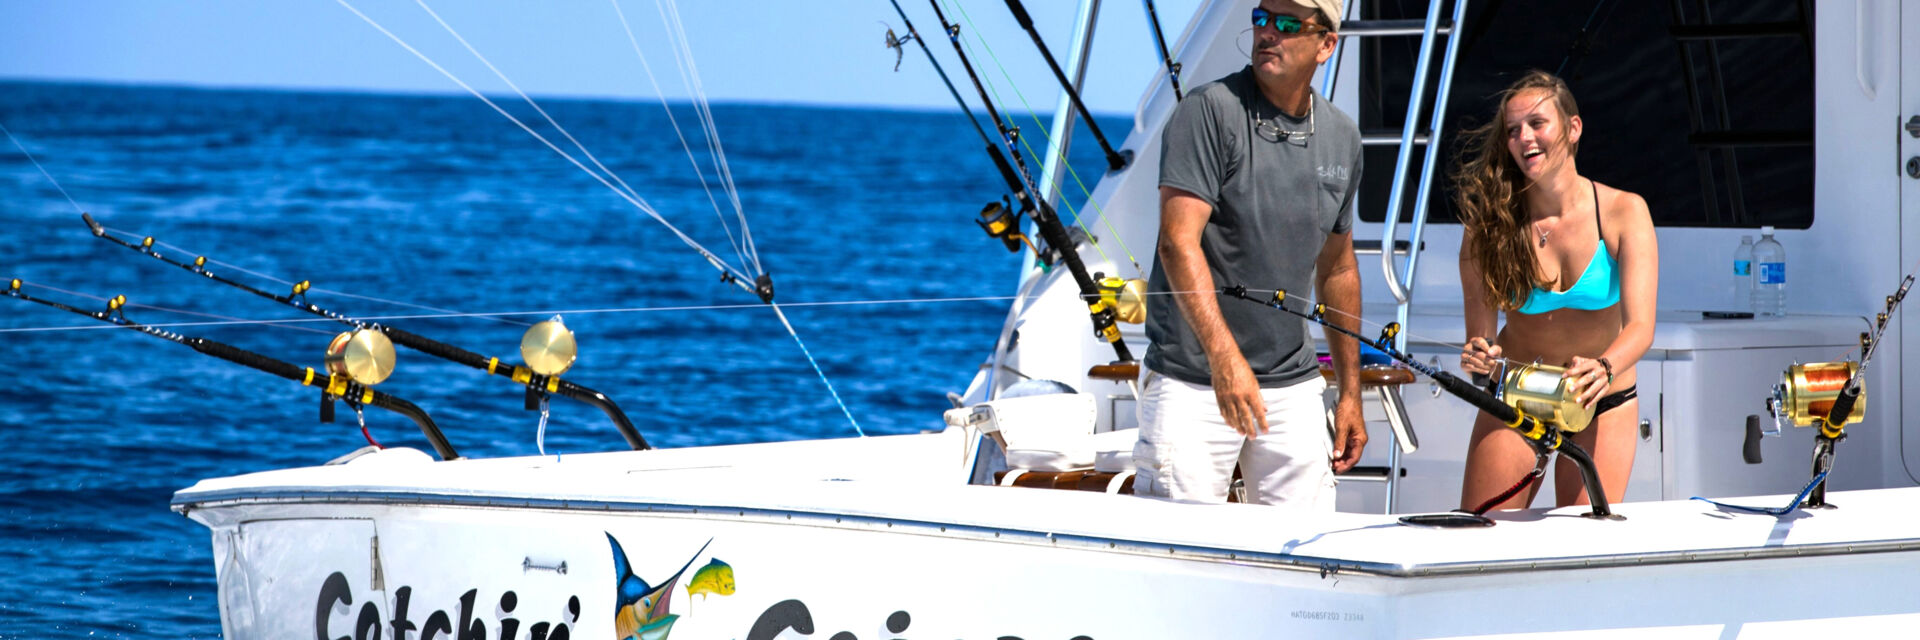 The Best Turks And Caicos Deep Sea Fishing Charters Visit Turks And